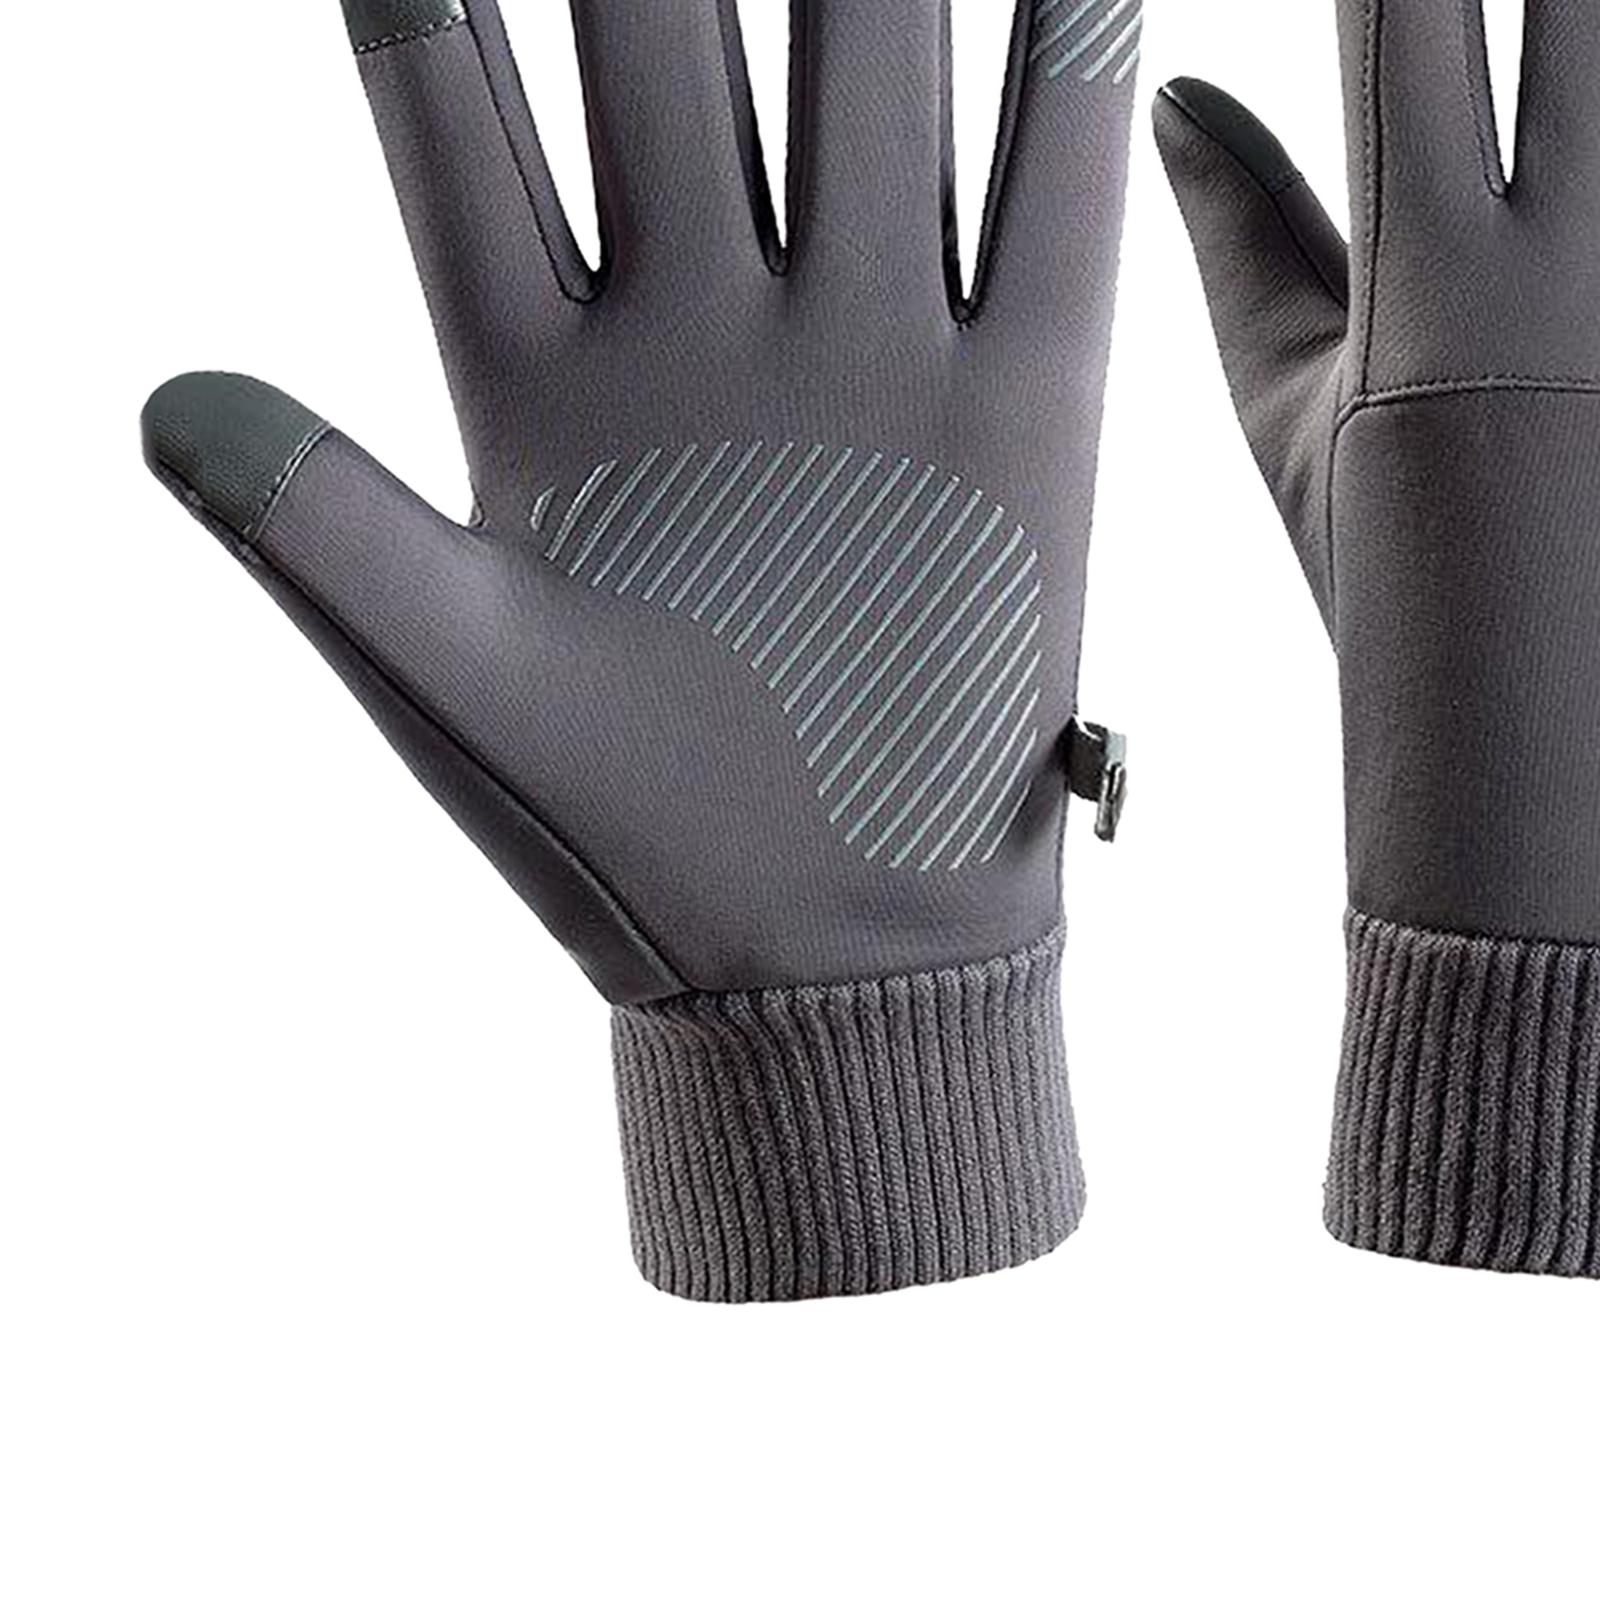 Winter Outdoor Cycling Hiking Sports Gloves Touch Screen XL Gray K147